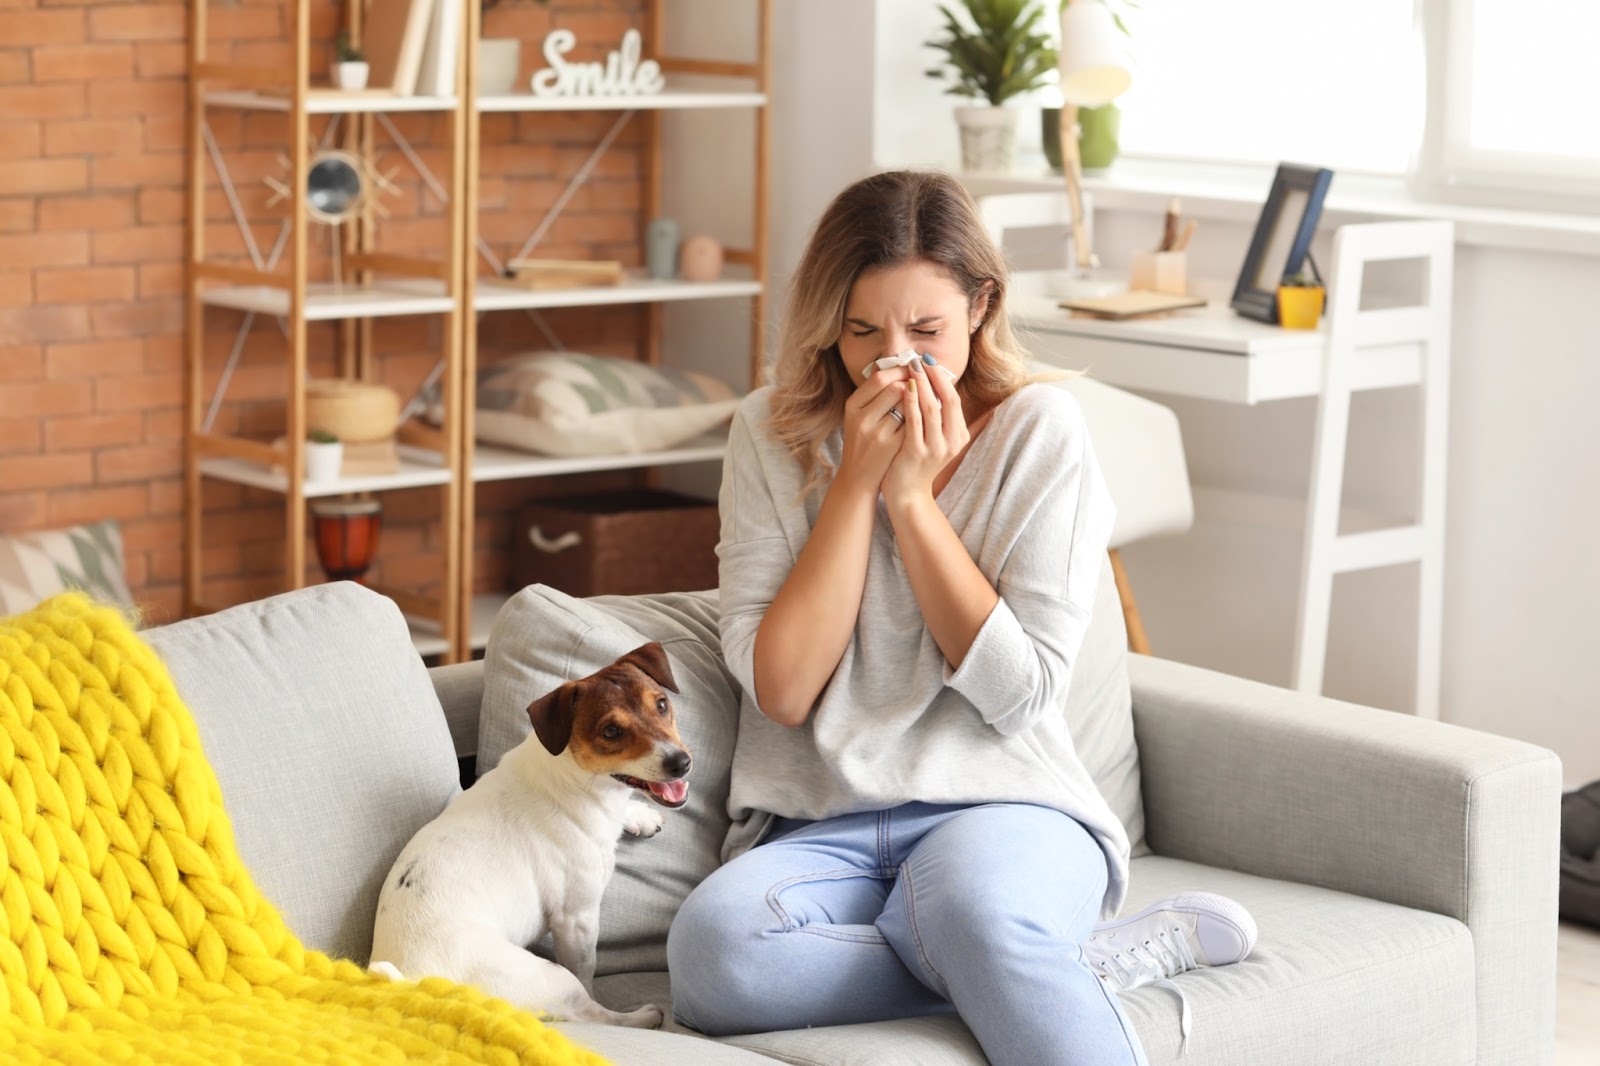 A woman sitting on the couch next to her dog, blowing her nose.